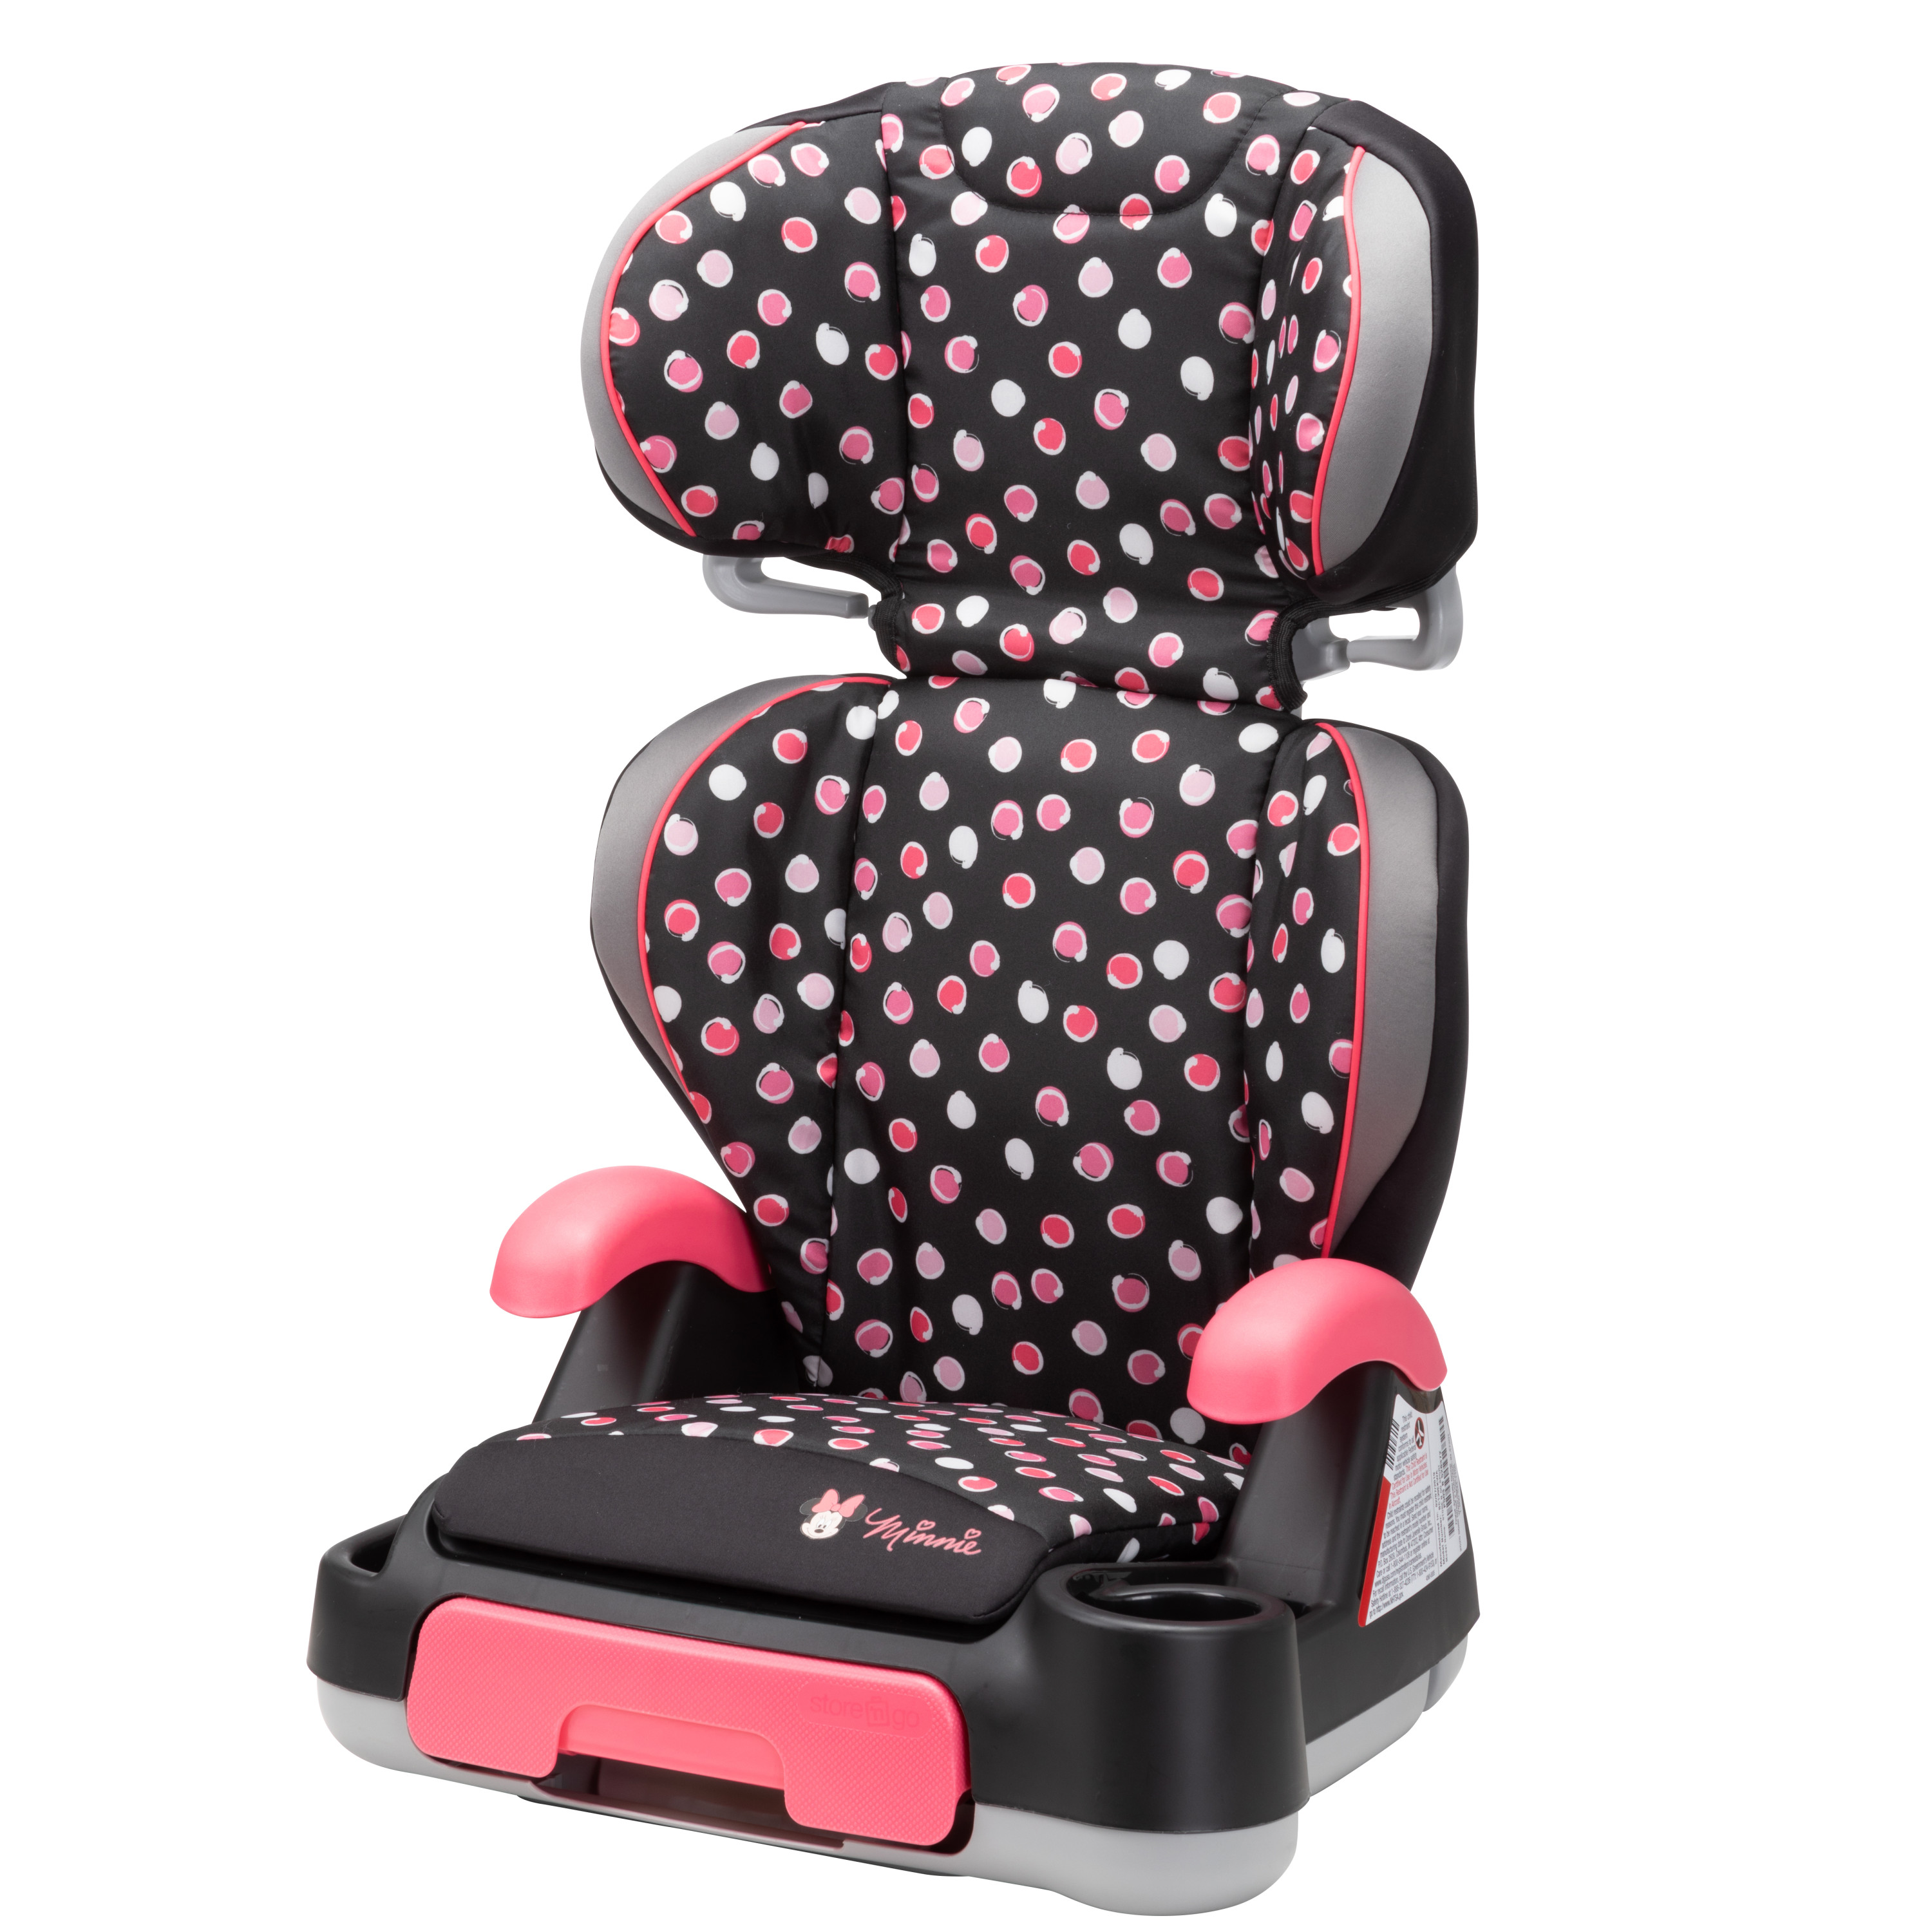 Disney Baby Store 'n Go Sport Booster Car Seat, Minnie Mash Up - image 1 of 21